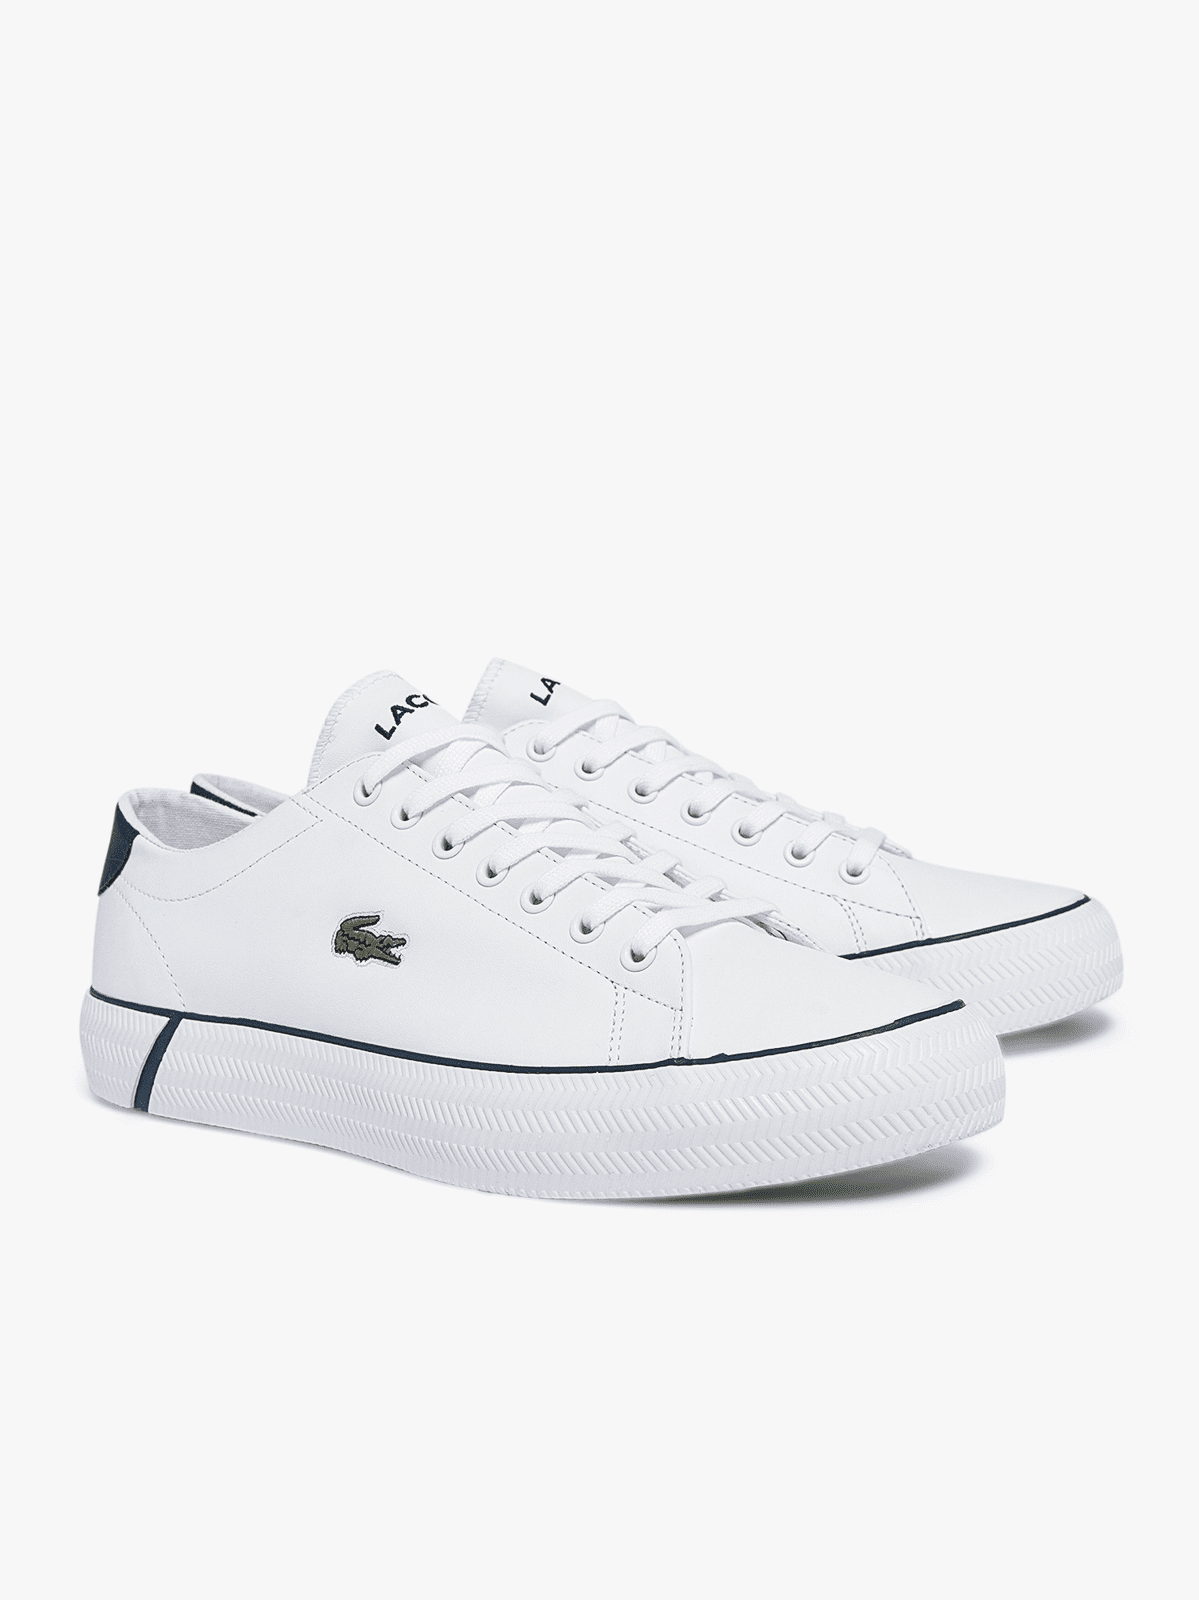 Lacoste Men's Gripshot Leather and Synthetic Sneakers White/Navy 41CMA0014 042.